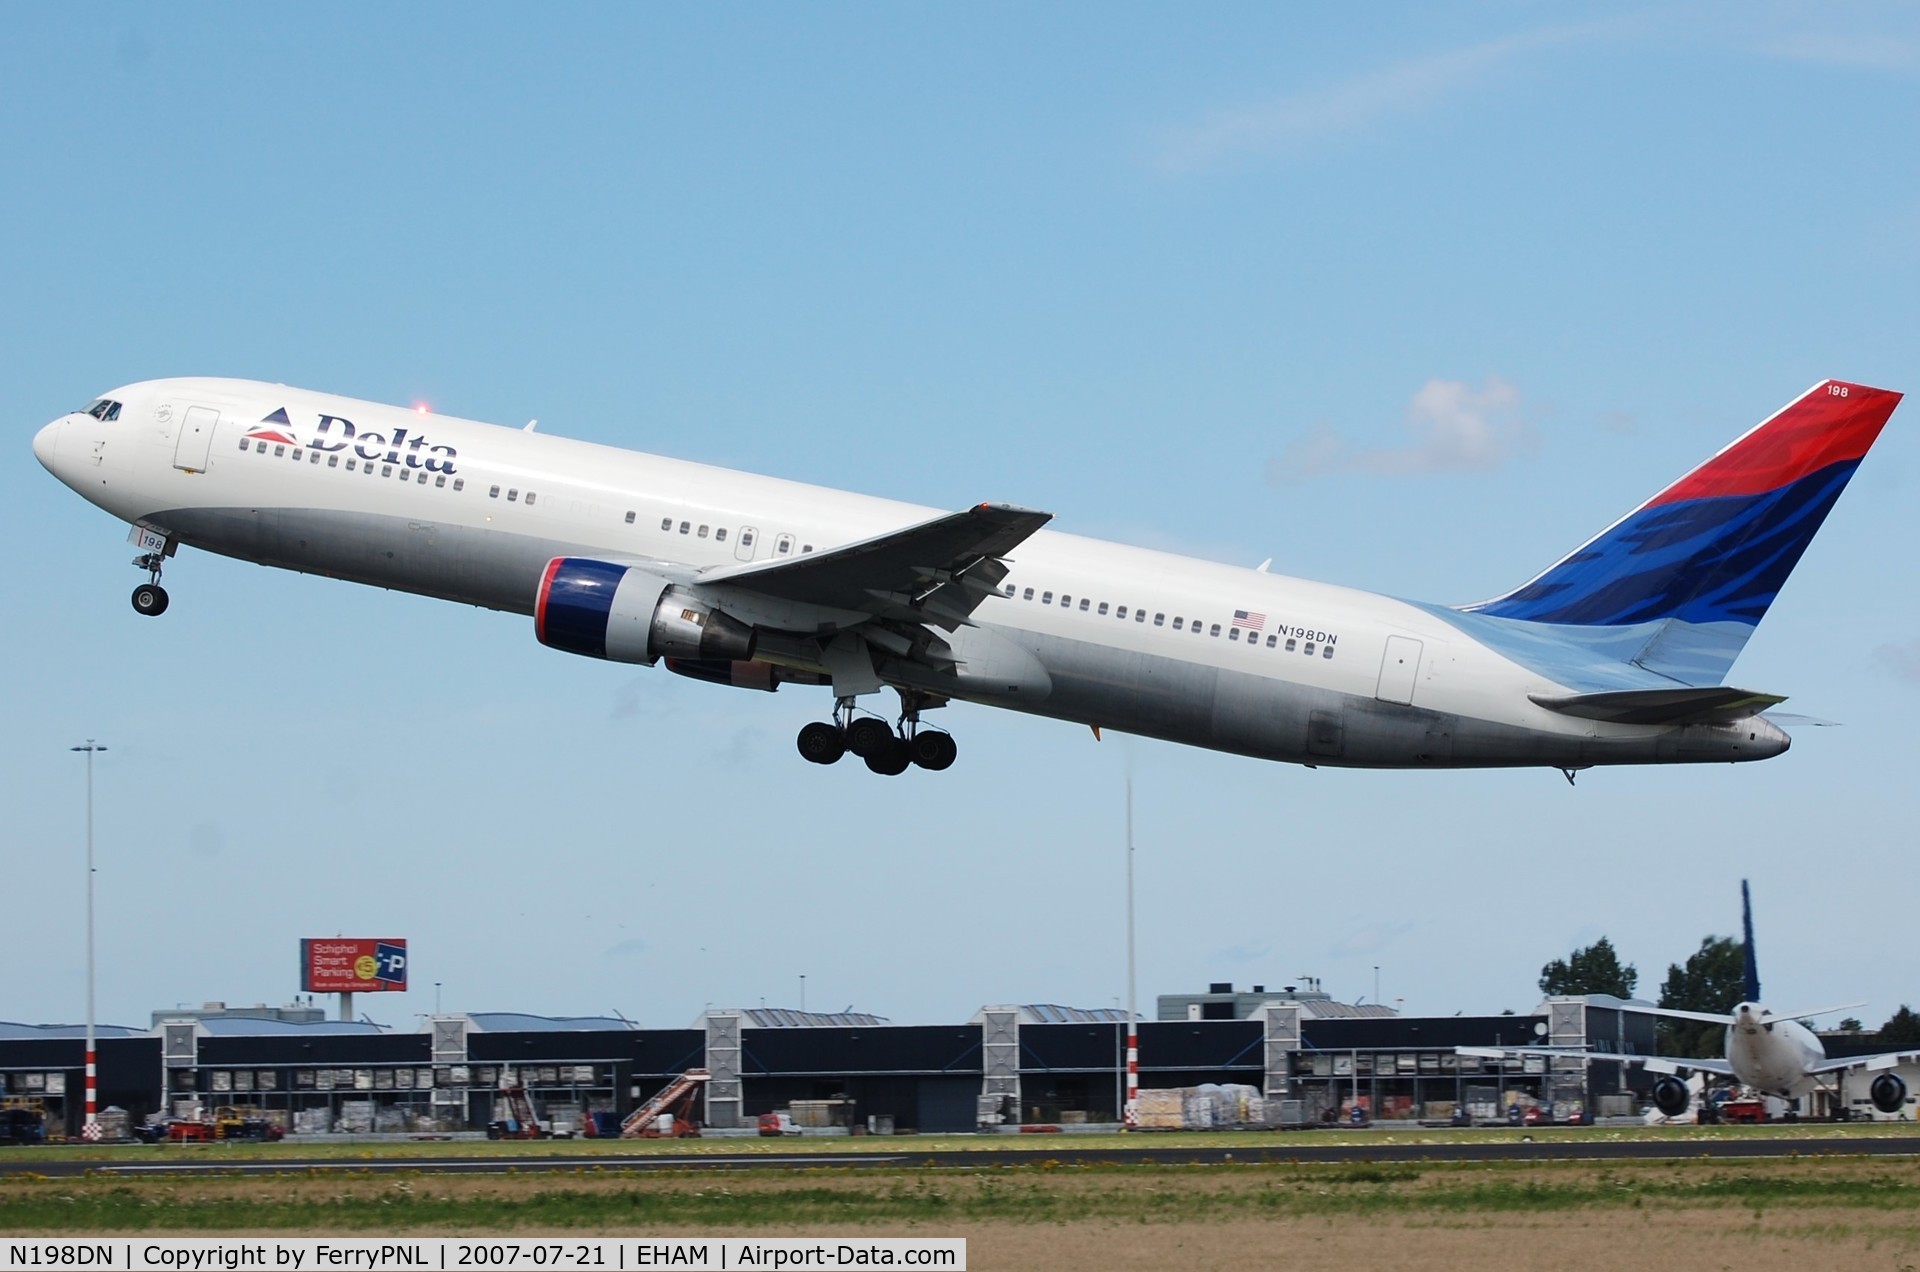 N198DN, 1998 Boeing 767-332 C/N 28455, Delta B763 taking-off from AMS